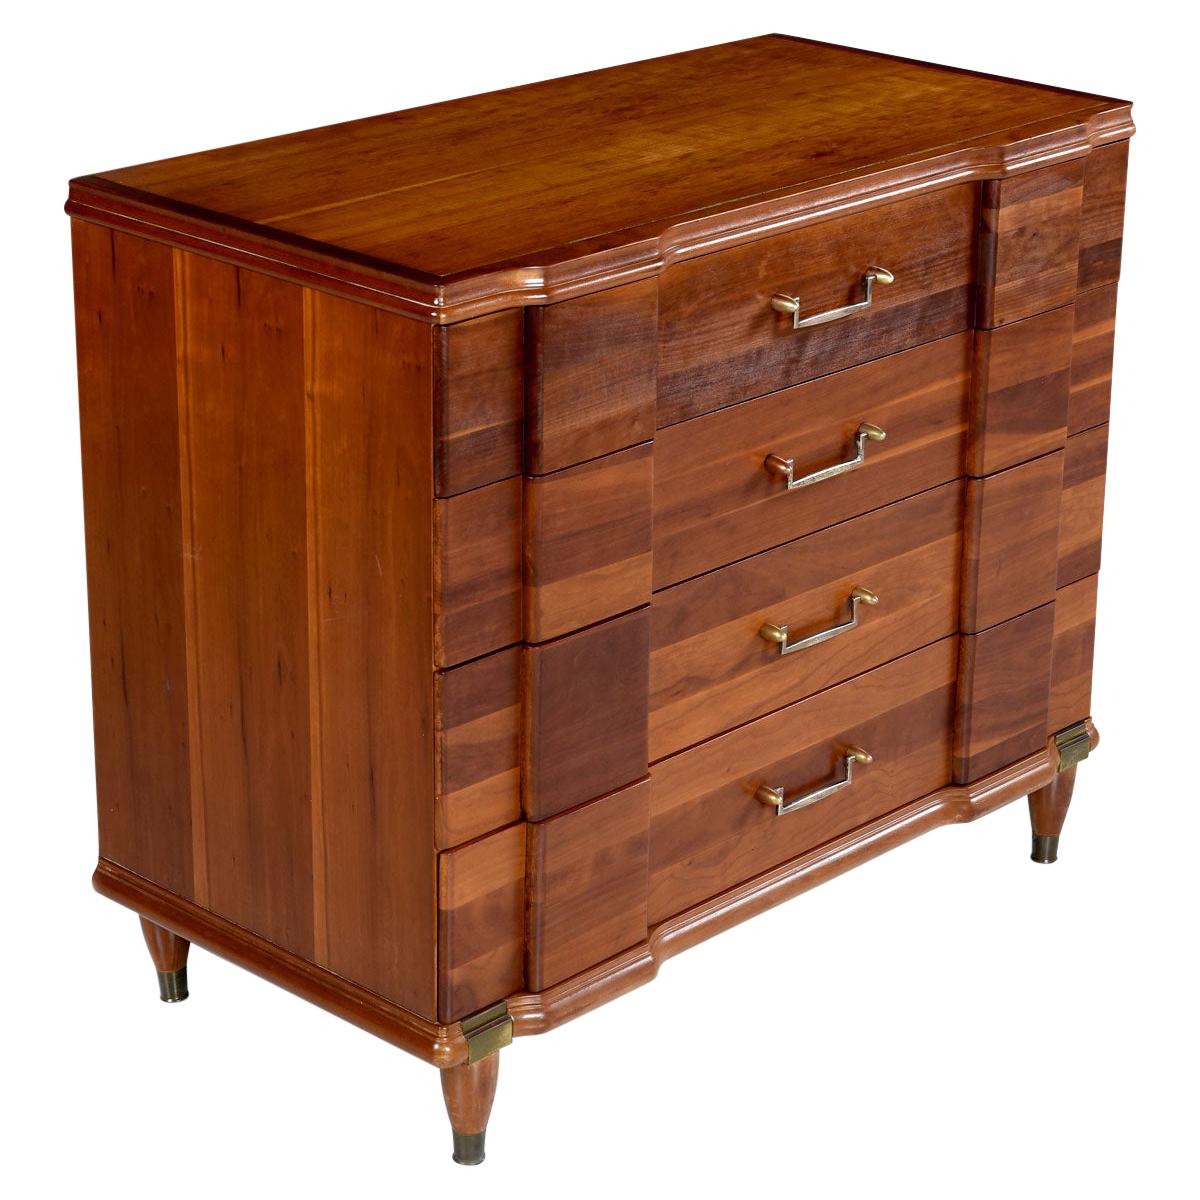 Cherry Bachelors Chest by Hickory MFG with Brass Bullet Shaped Handles